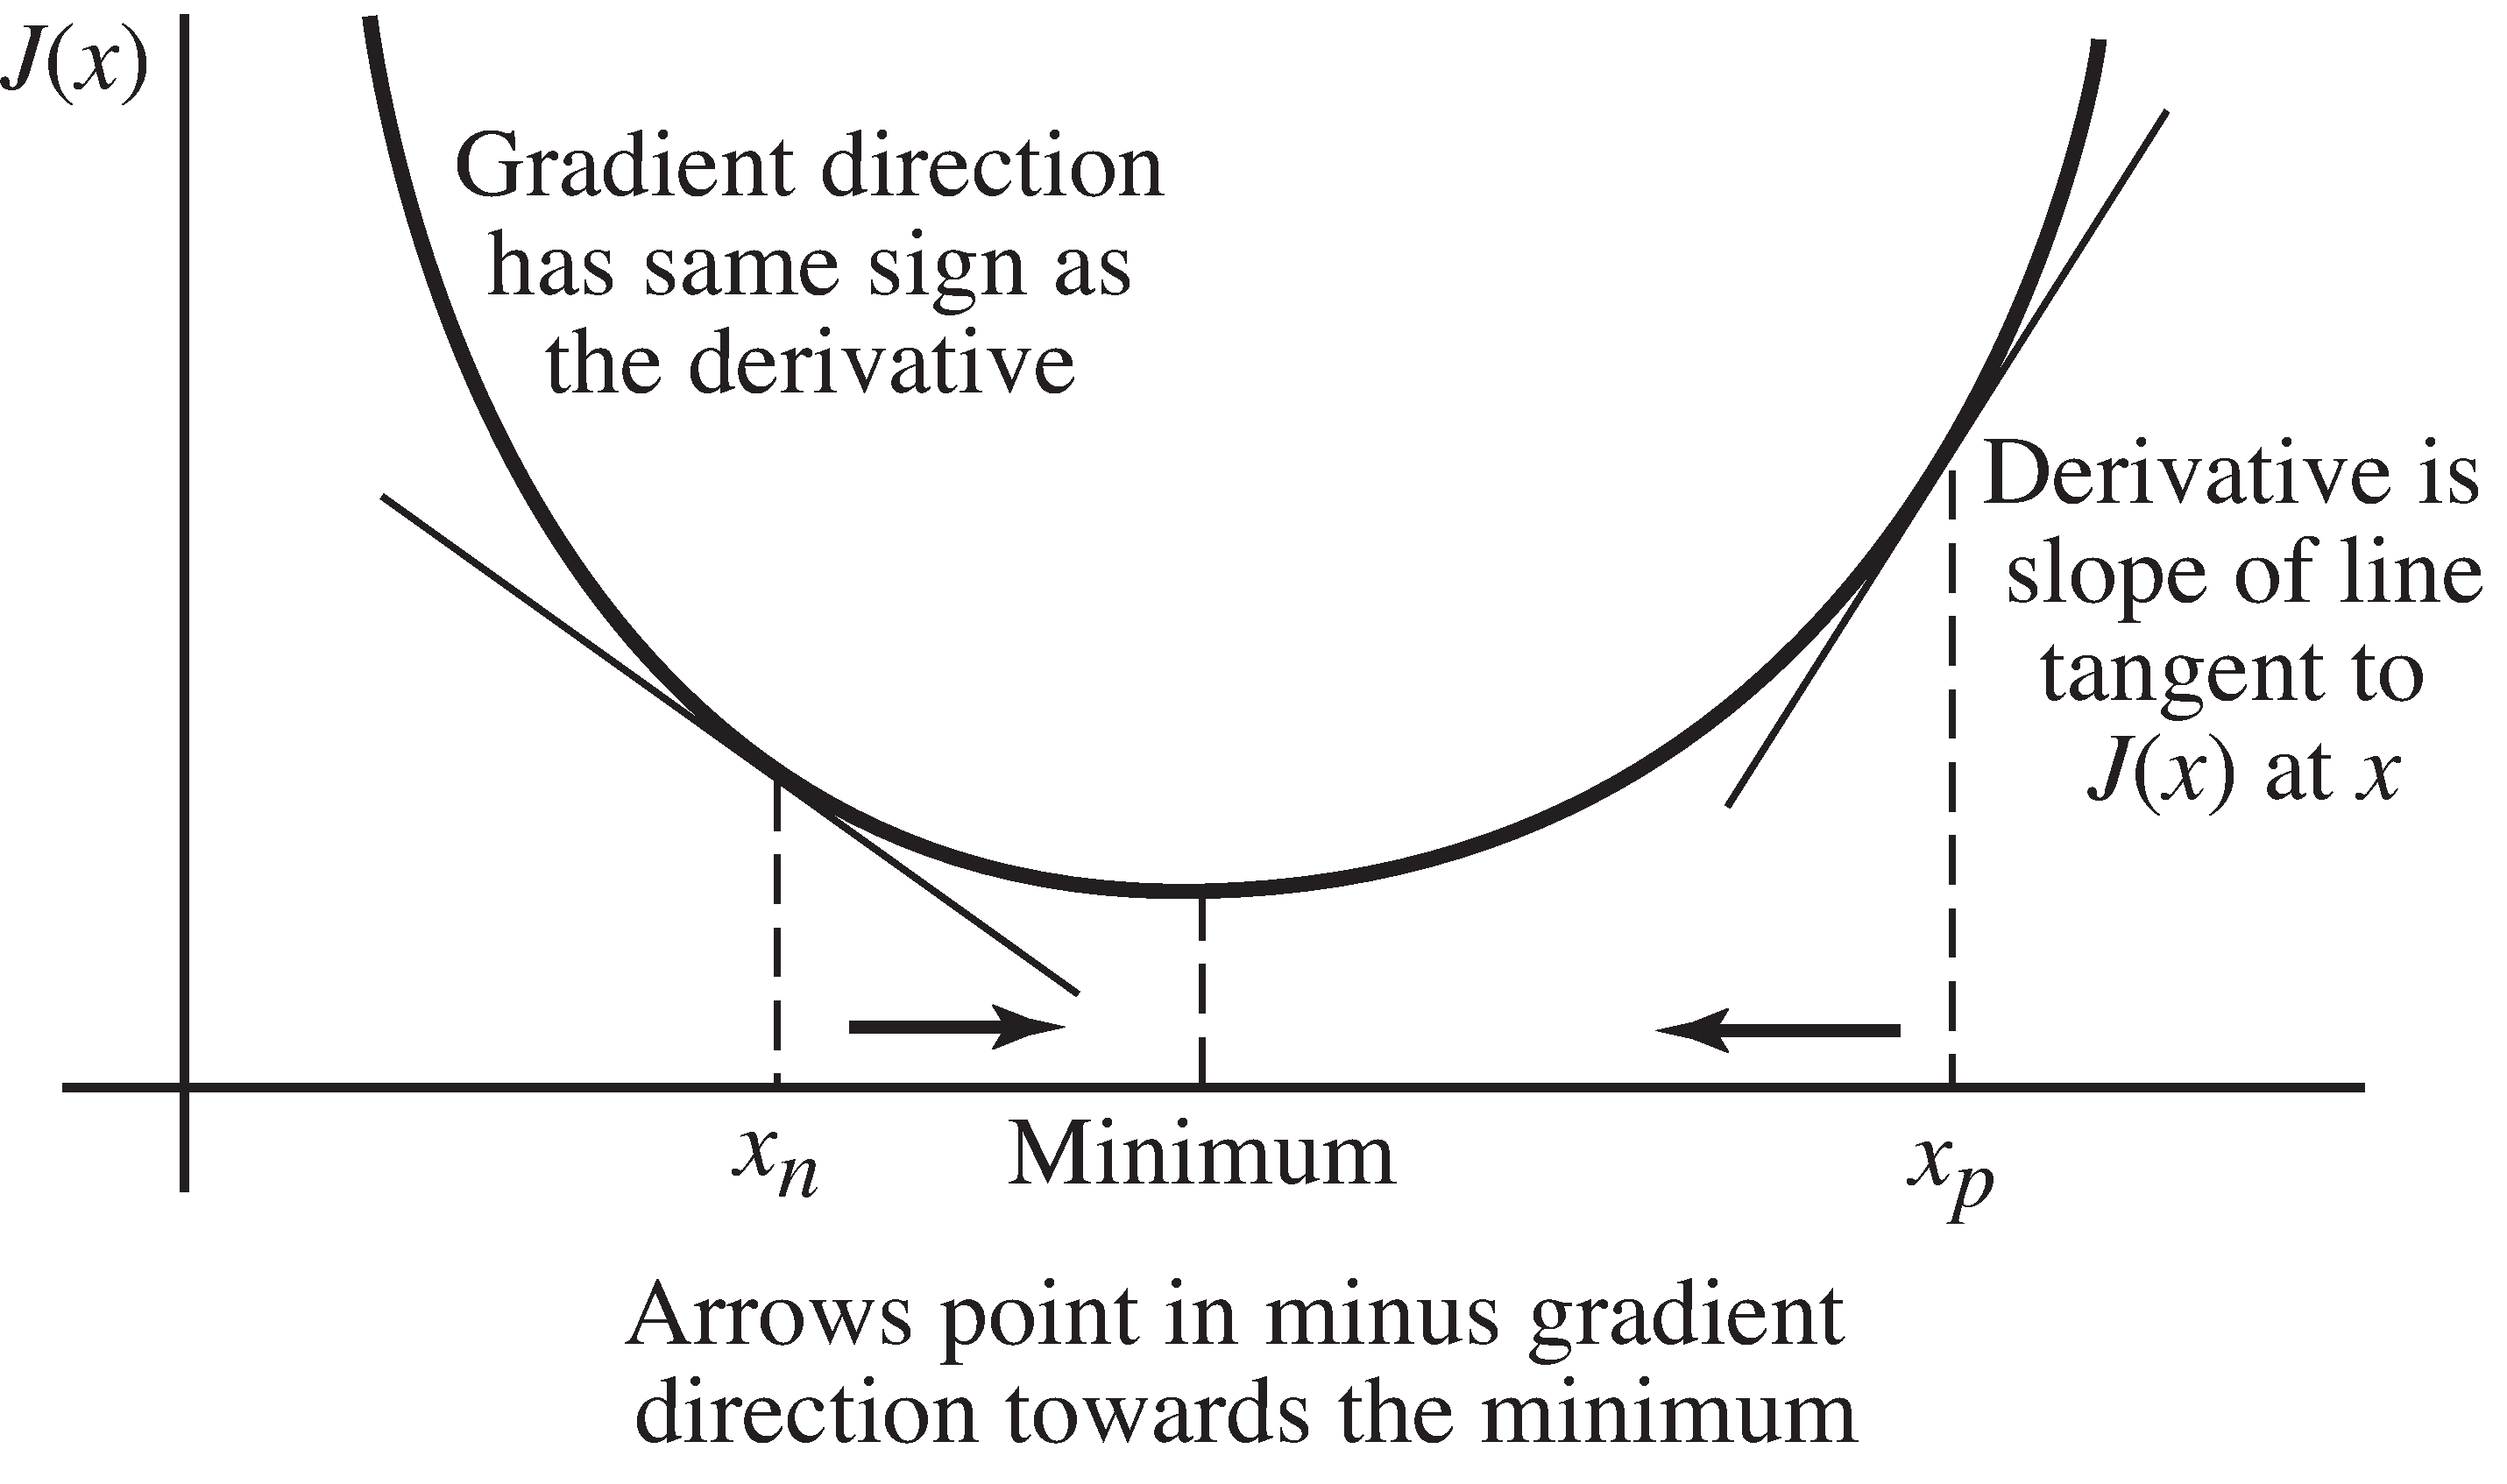 Steepest descent finds the minimum of a function by always pointing in the direction that leads downhill.